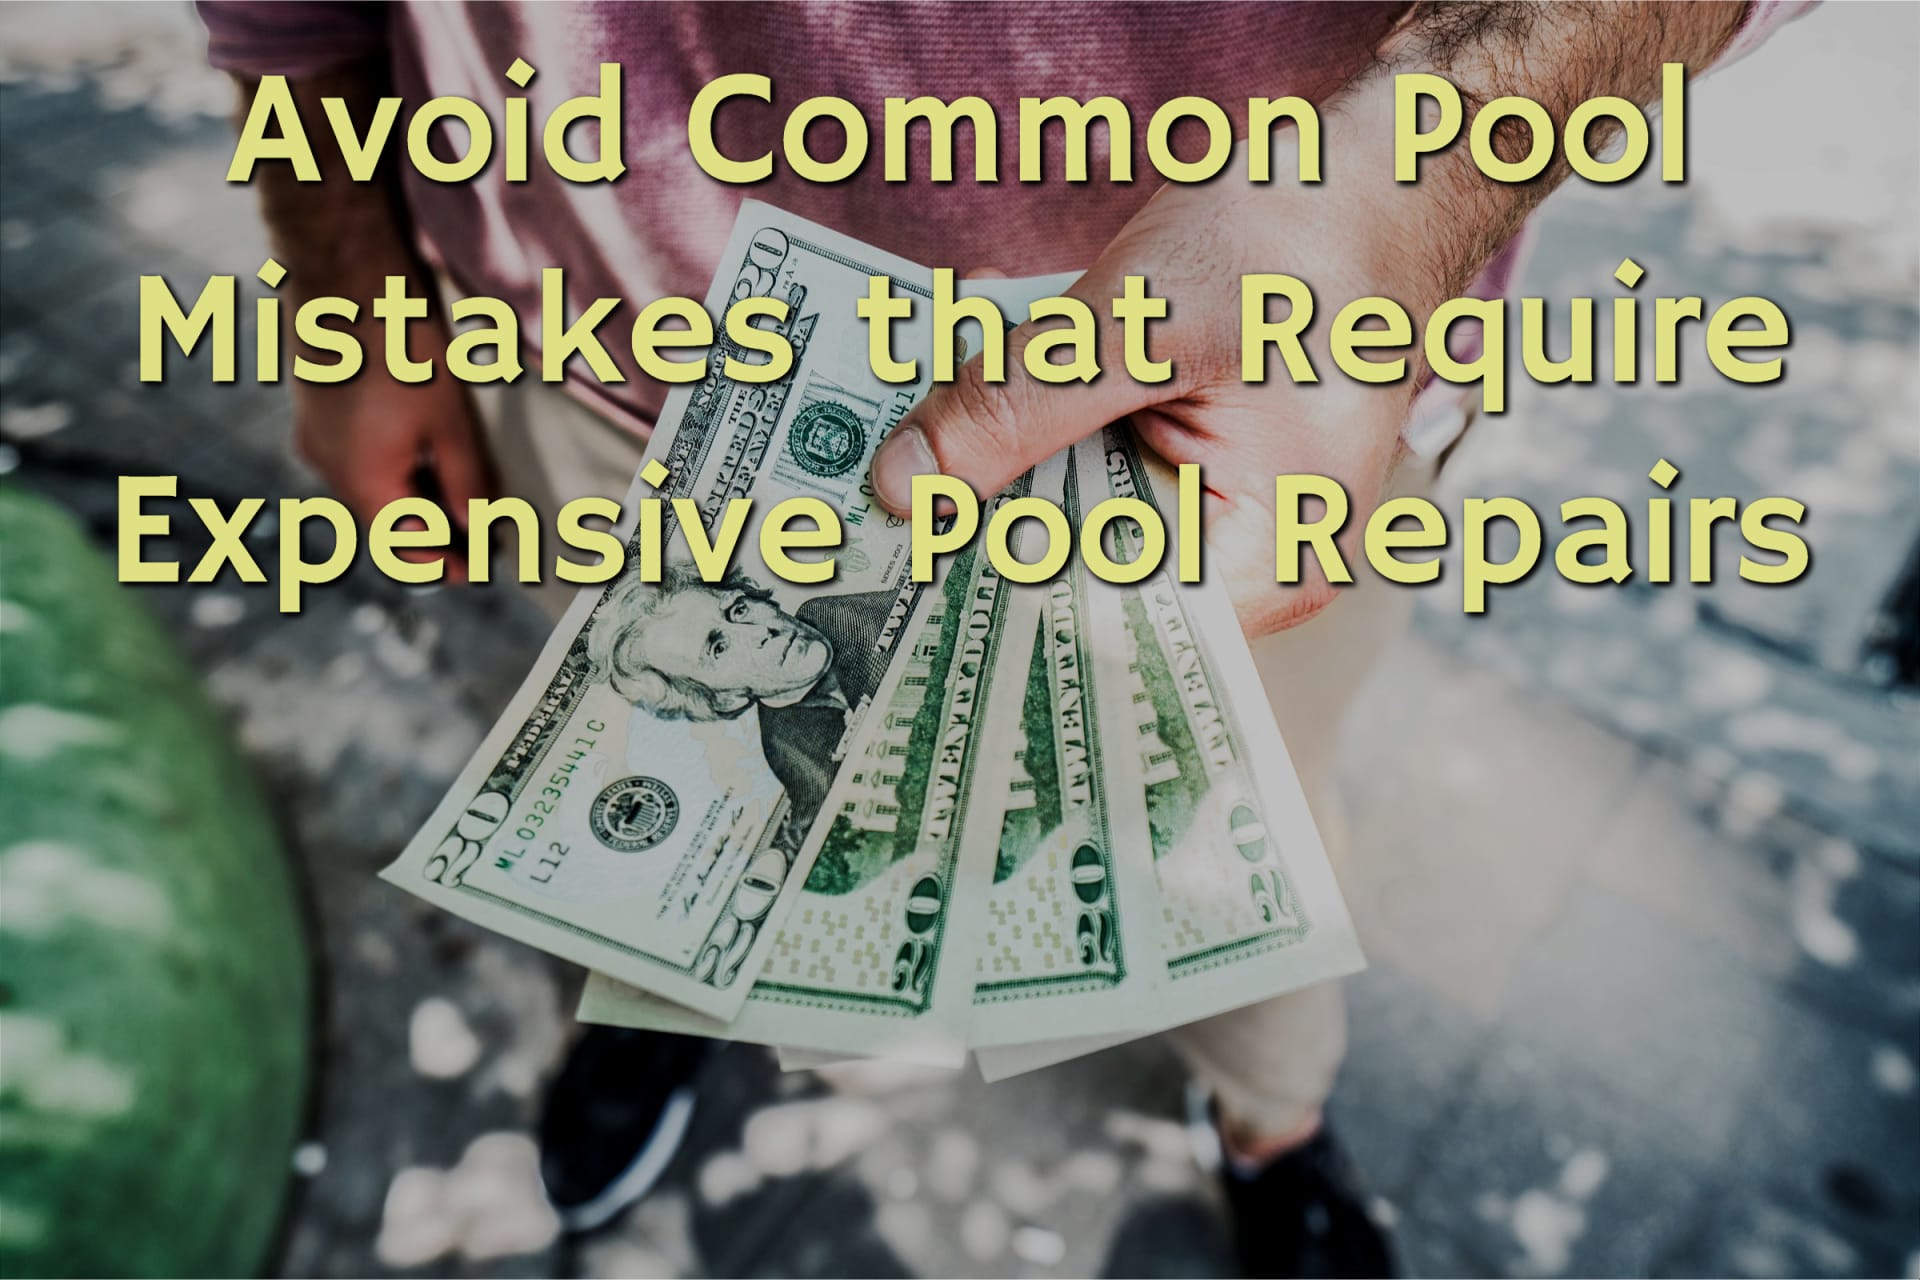 Man paying for expensive pool repairs